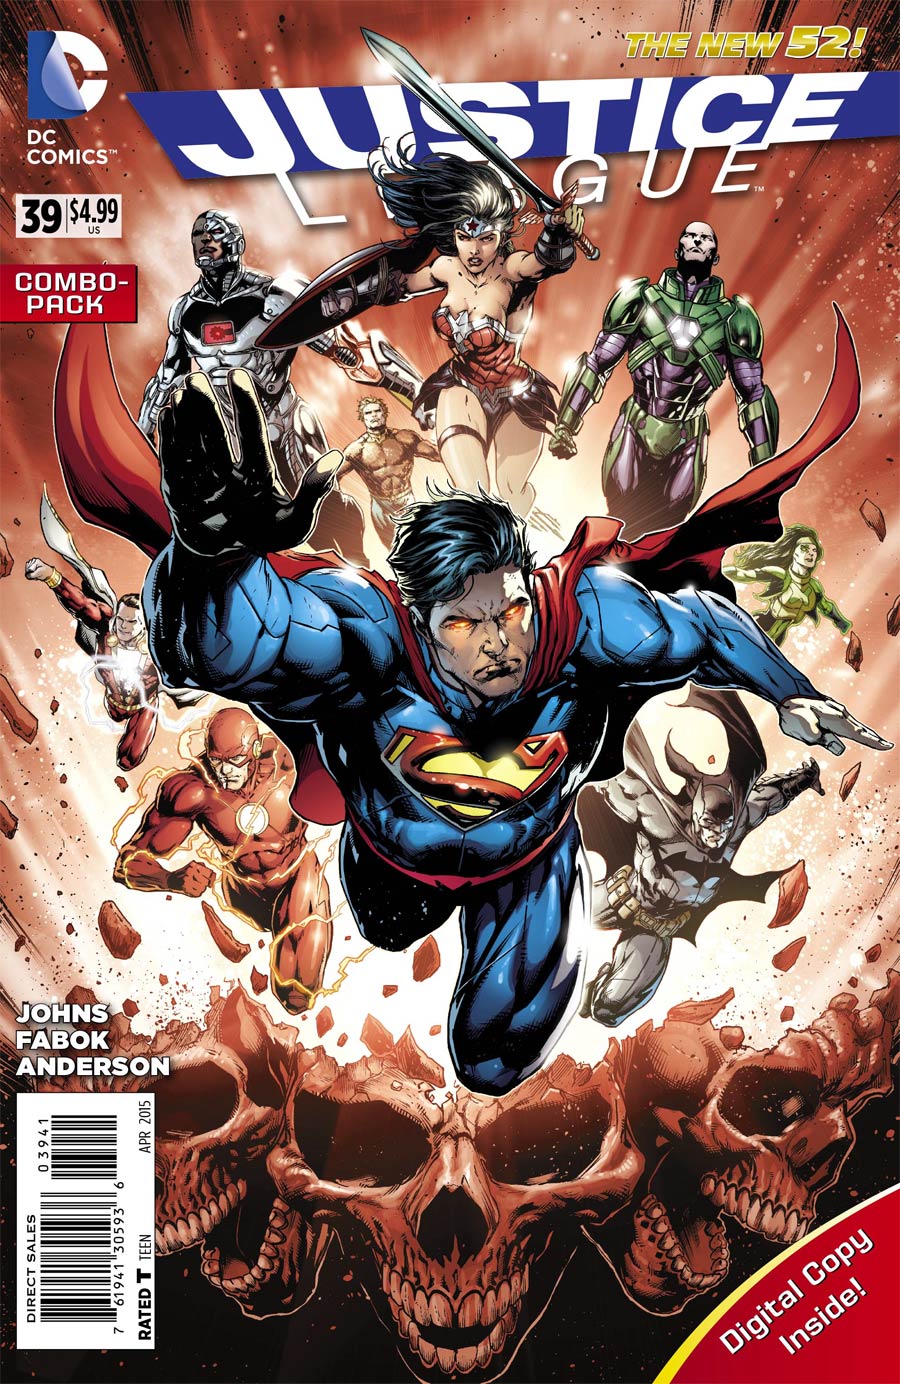 Justice League Vol 2 #39 Cover C Combo Pack With Polybag